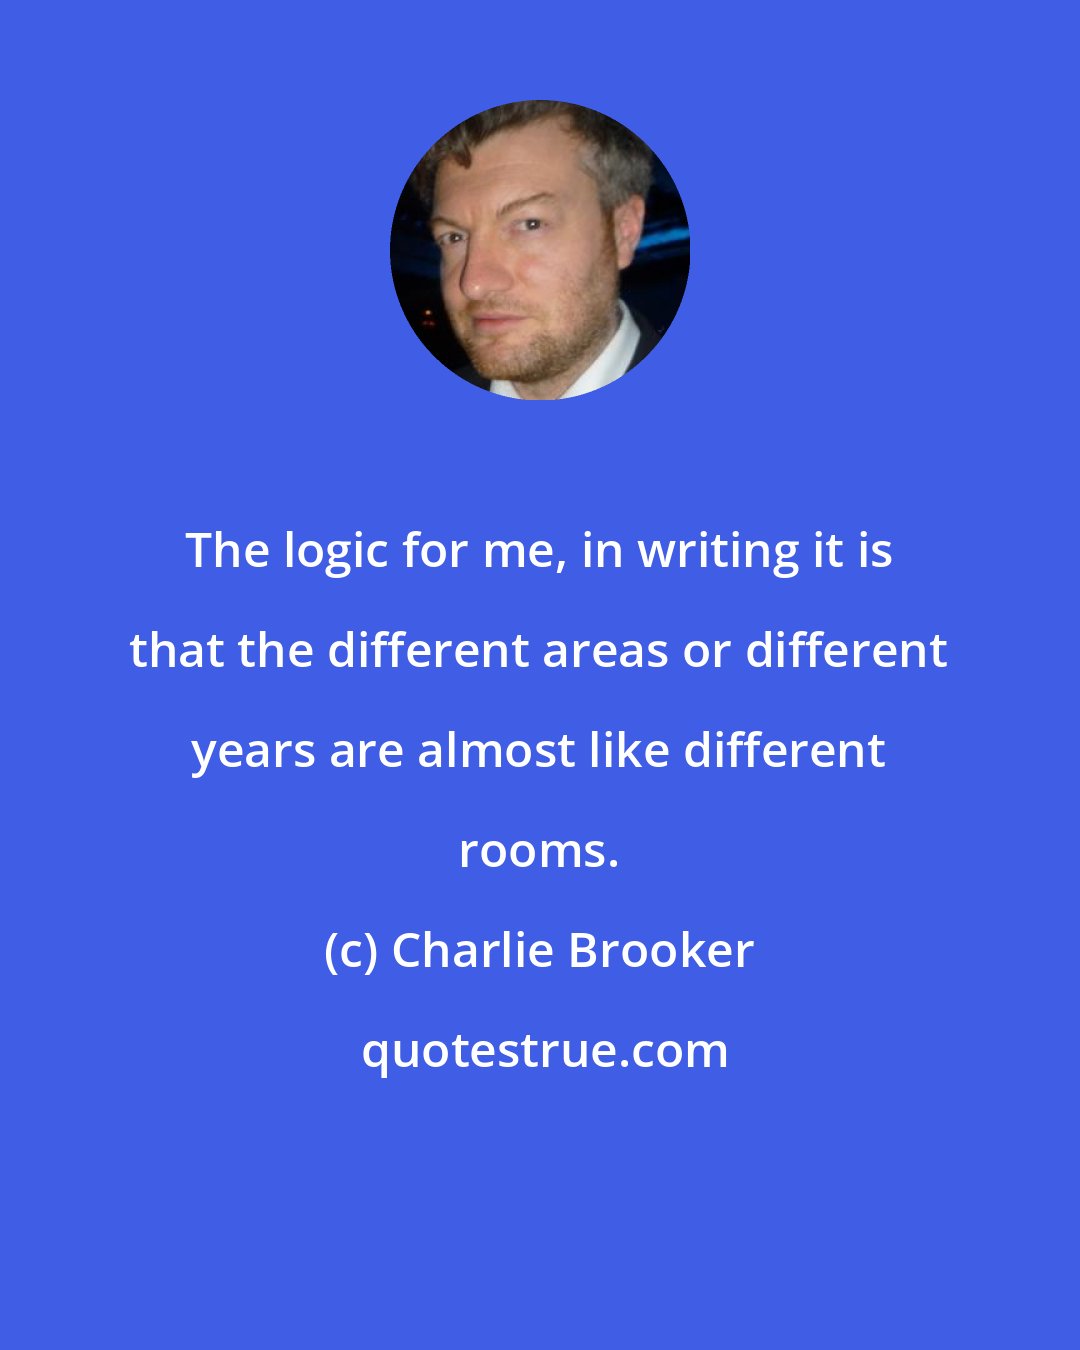 Charlie Brooker: The logic for me, in writing it is that the different areas or different years are almost like different rooms.